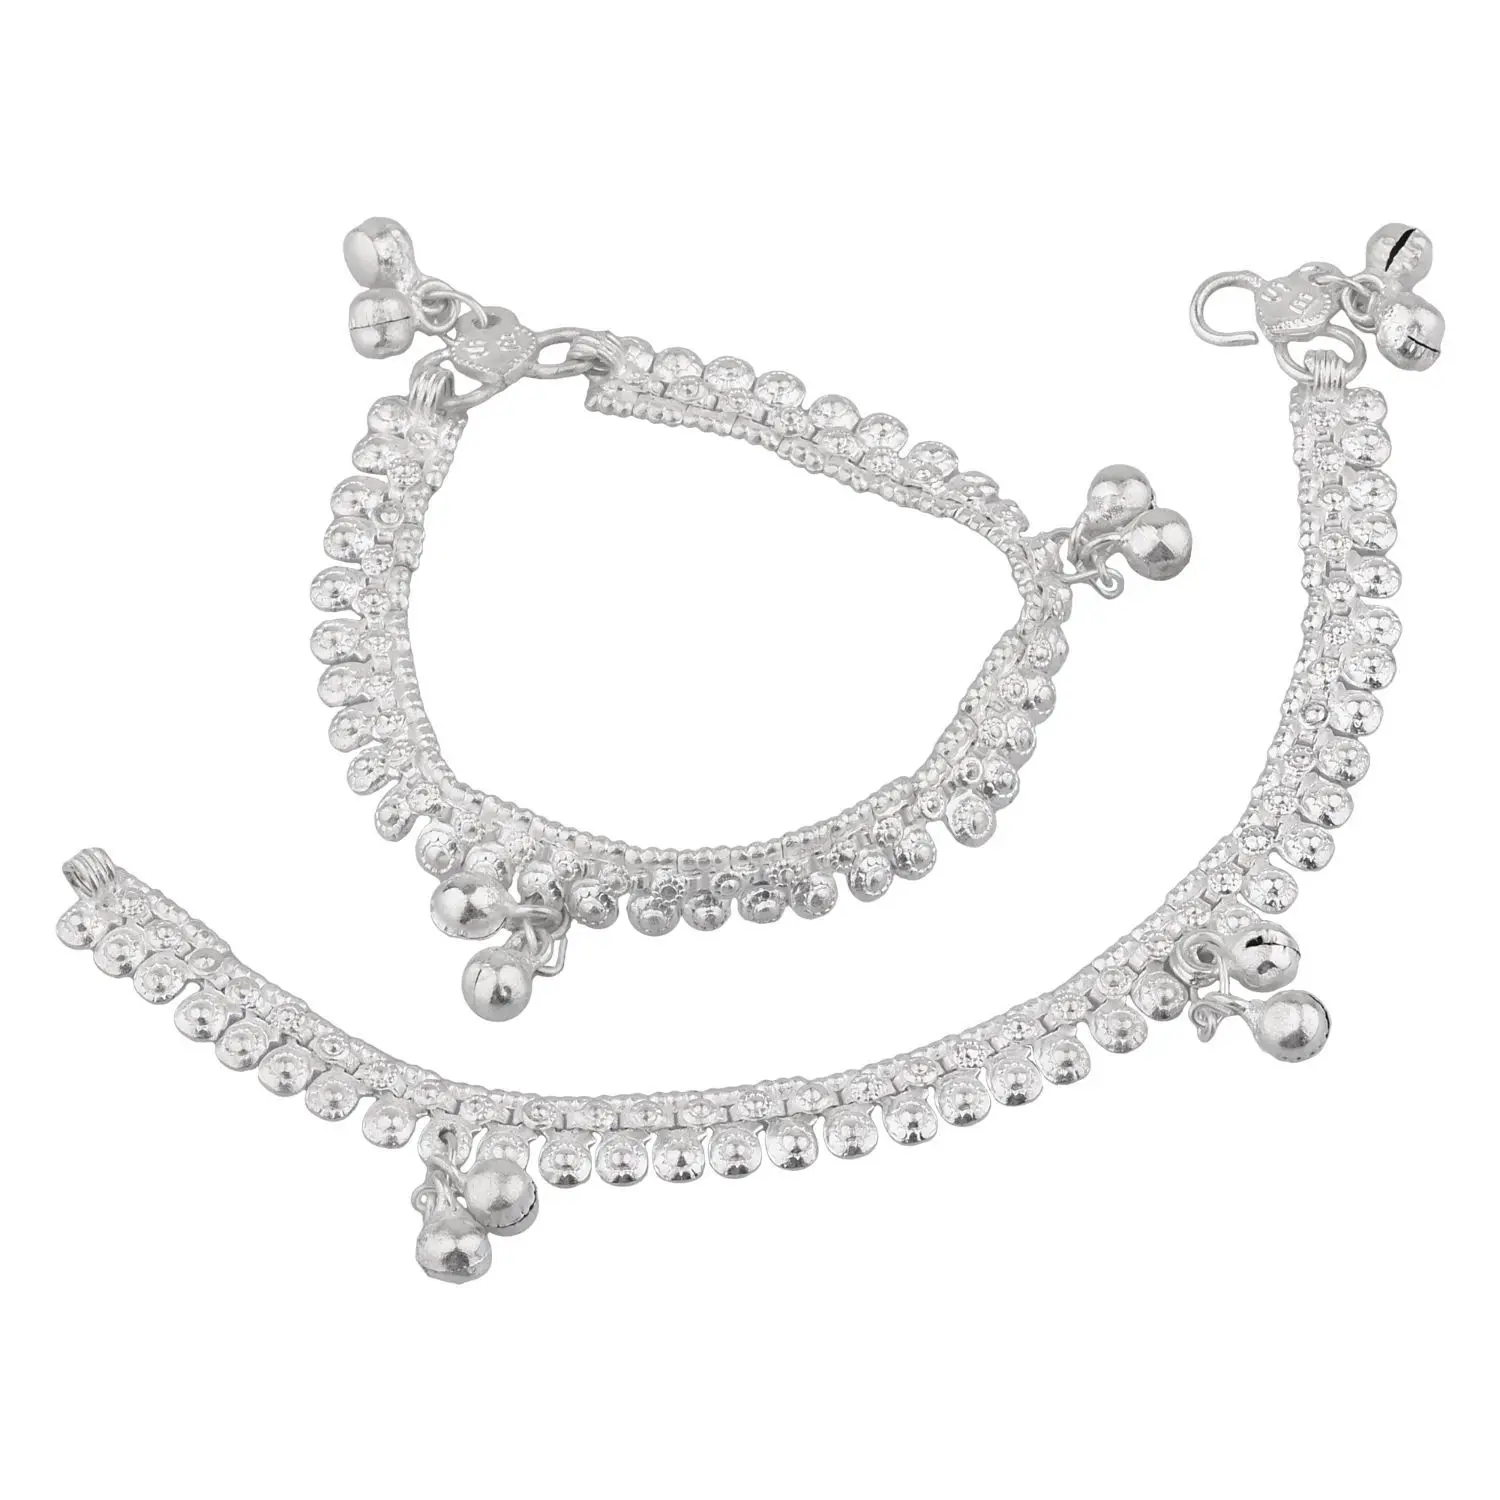 Efulgenz Indian Silver Tone Bell Charms Tassel Chain Anklet Set Bracelet Payal Foot Jewelry 